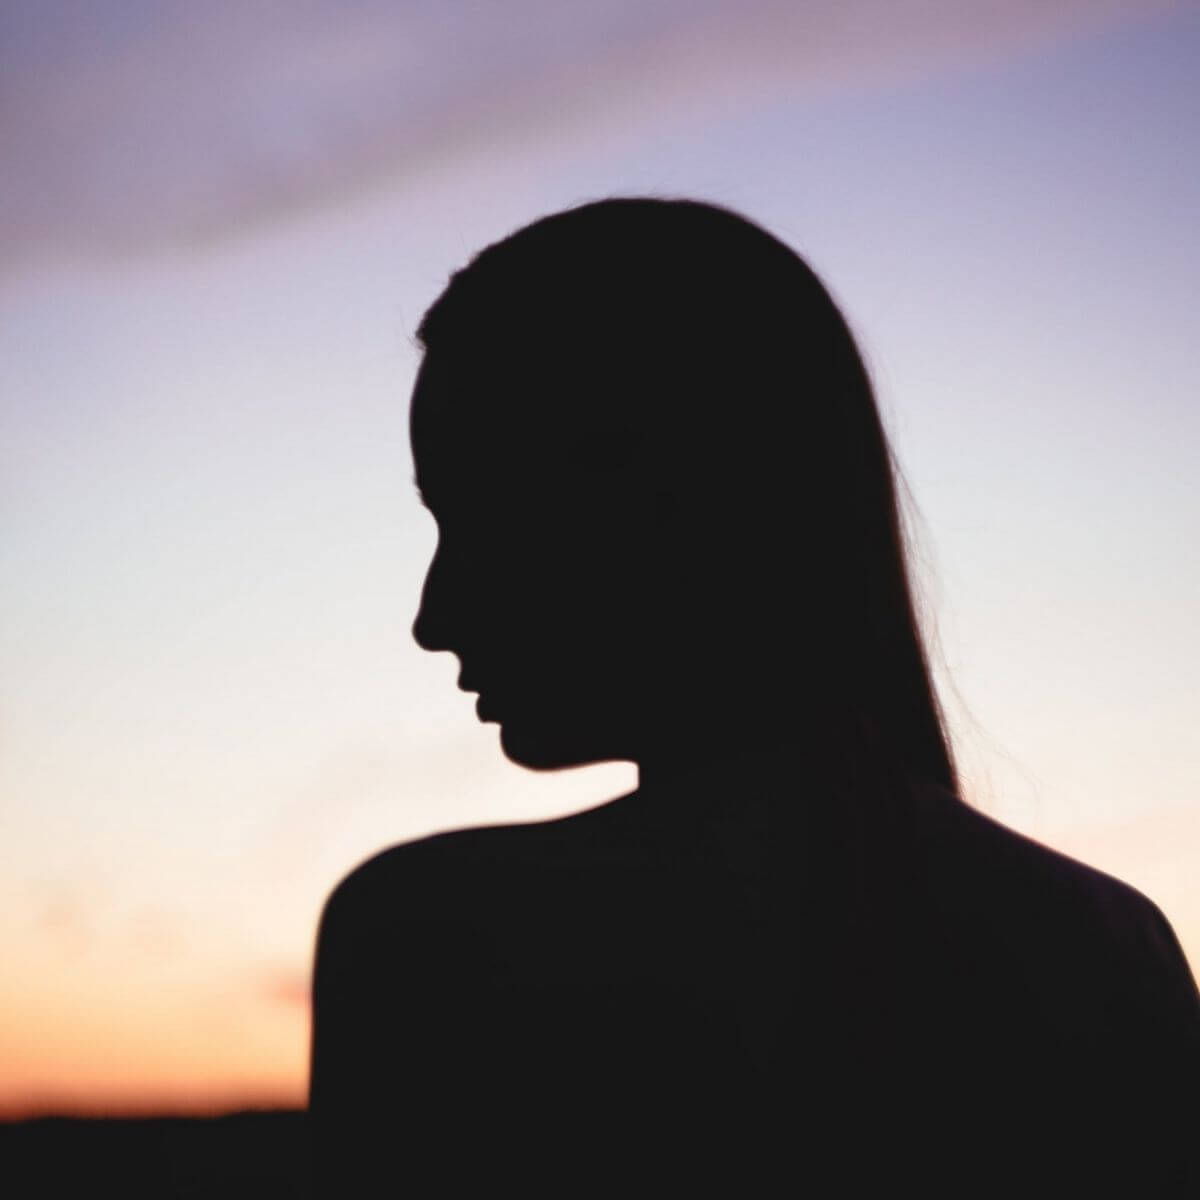 Silhouette of a person looking to the left during a sunset.